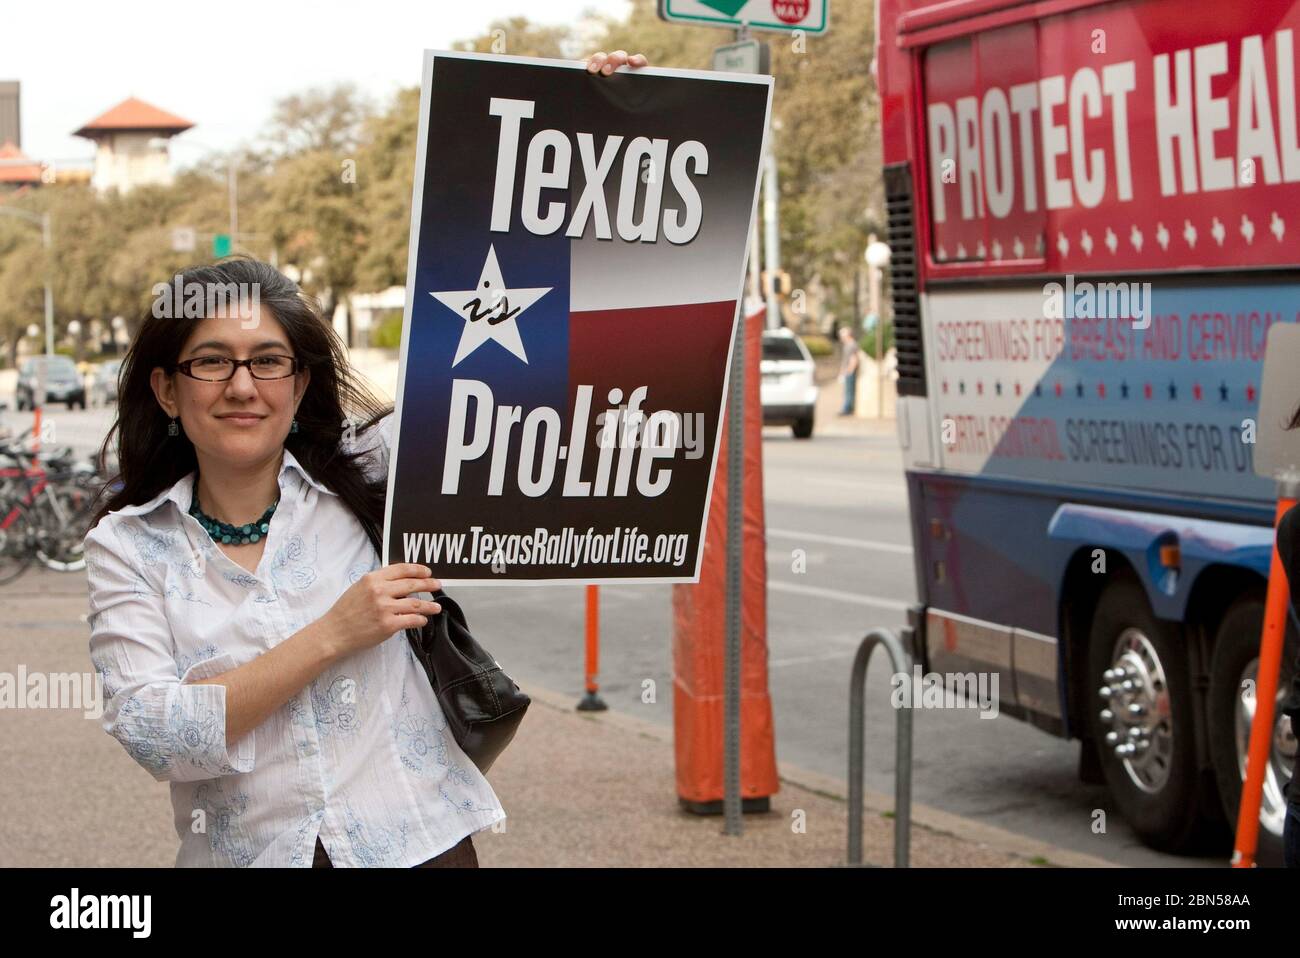 March 6th, 2012: A woman holds an opposition pro-life sigh during a Protest against Texas lawmakers decision regarding changed to the  the Women's Health Program. the federal government is expected to cut funding for the program because Texas improperly excluded Planned Parenthood from its list of providers January 12, 2012  © Marjorie Kamys Cotera/ Daemmrich Photos Stock Photo